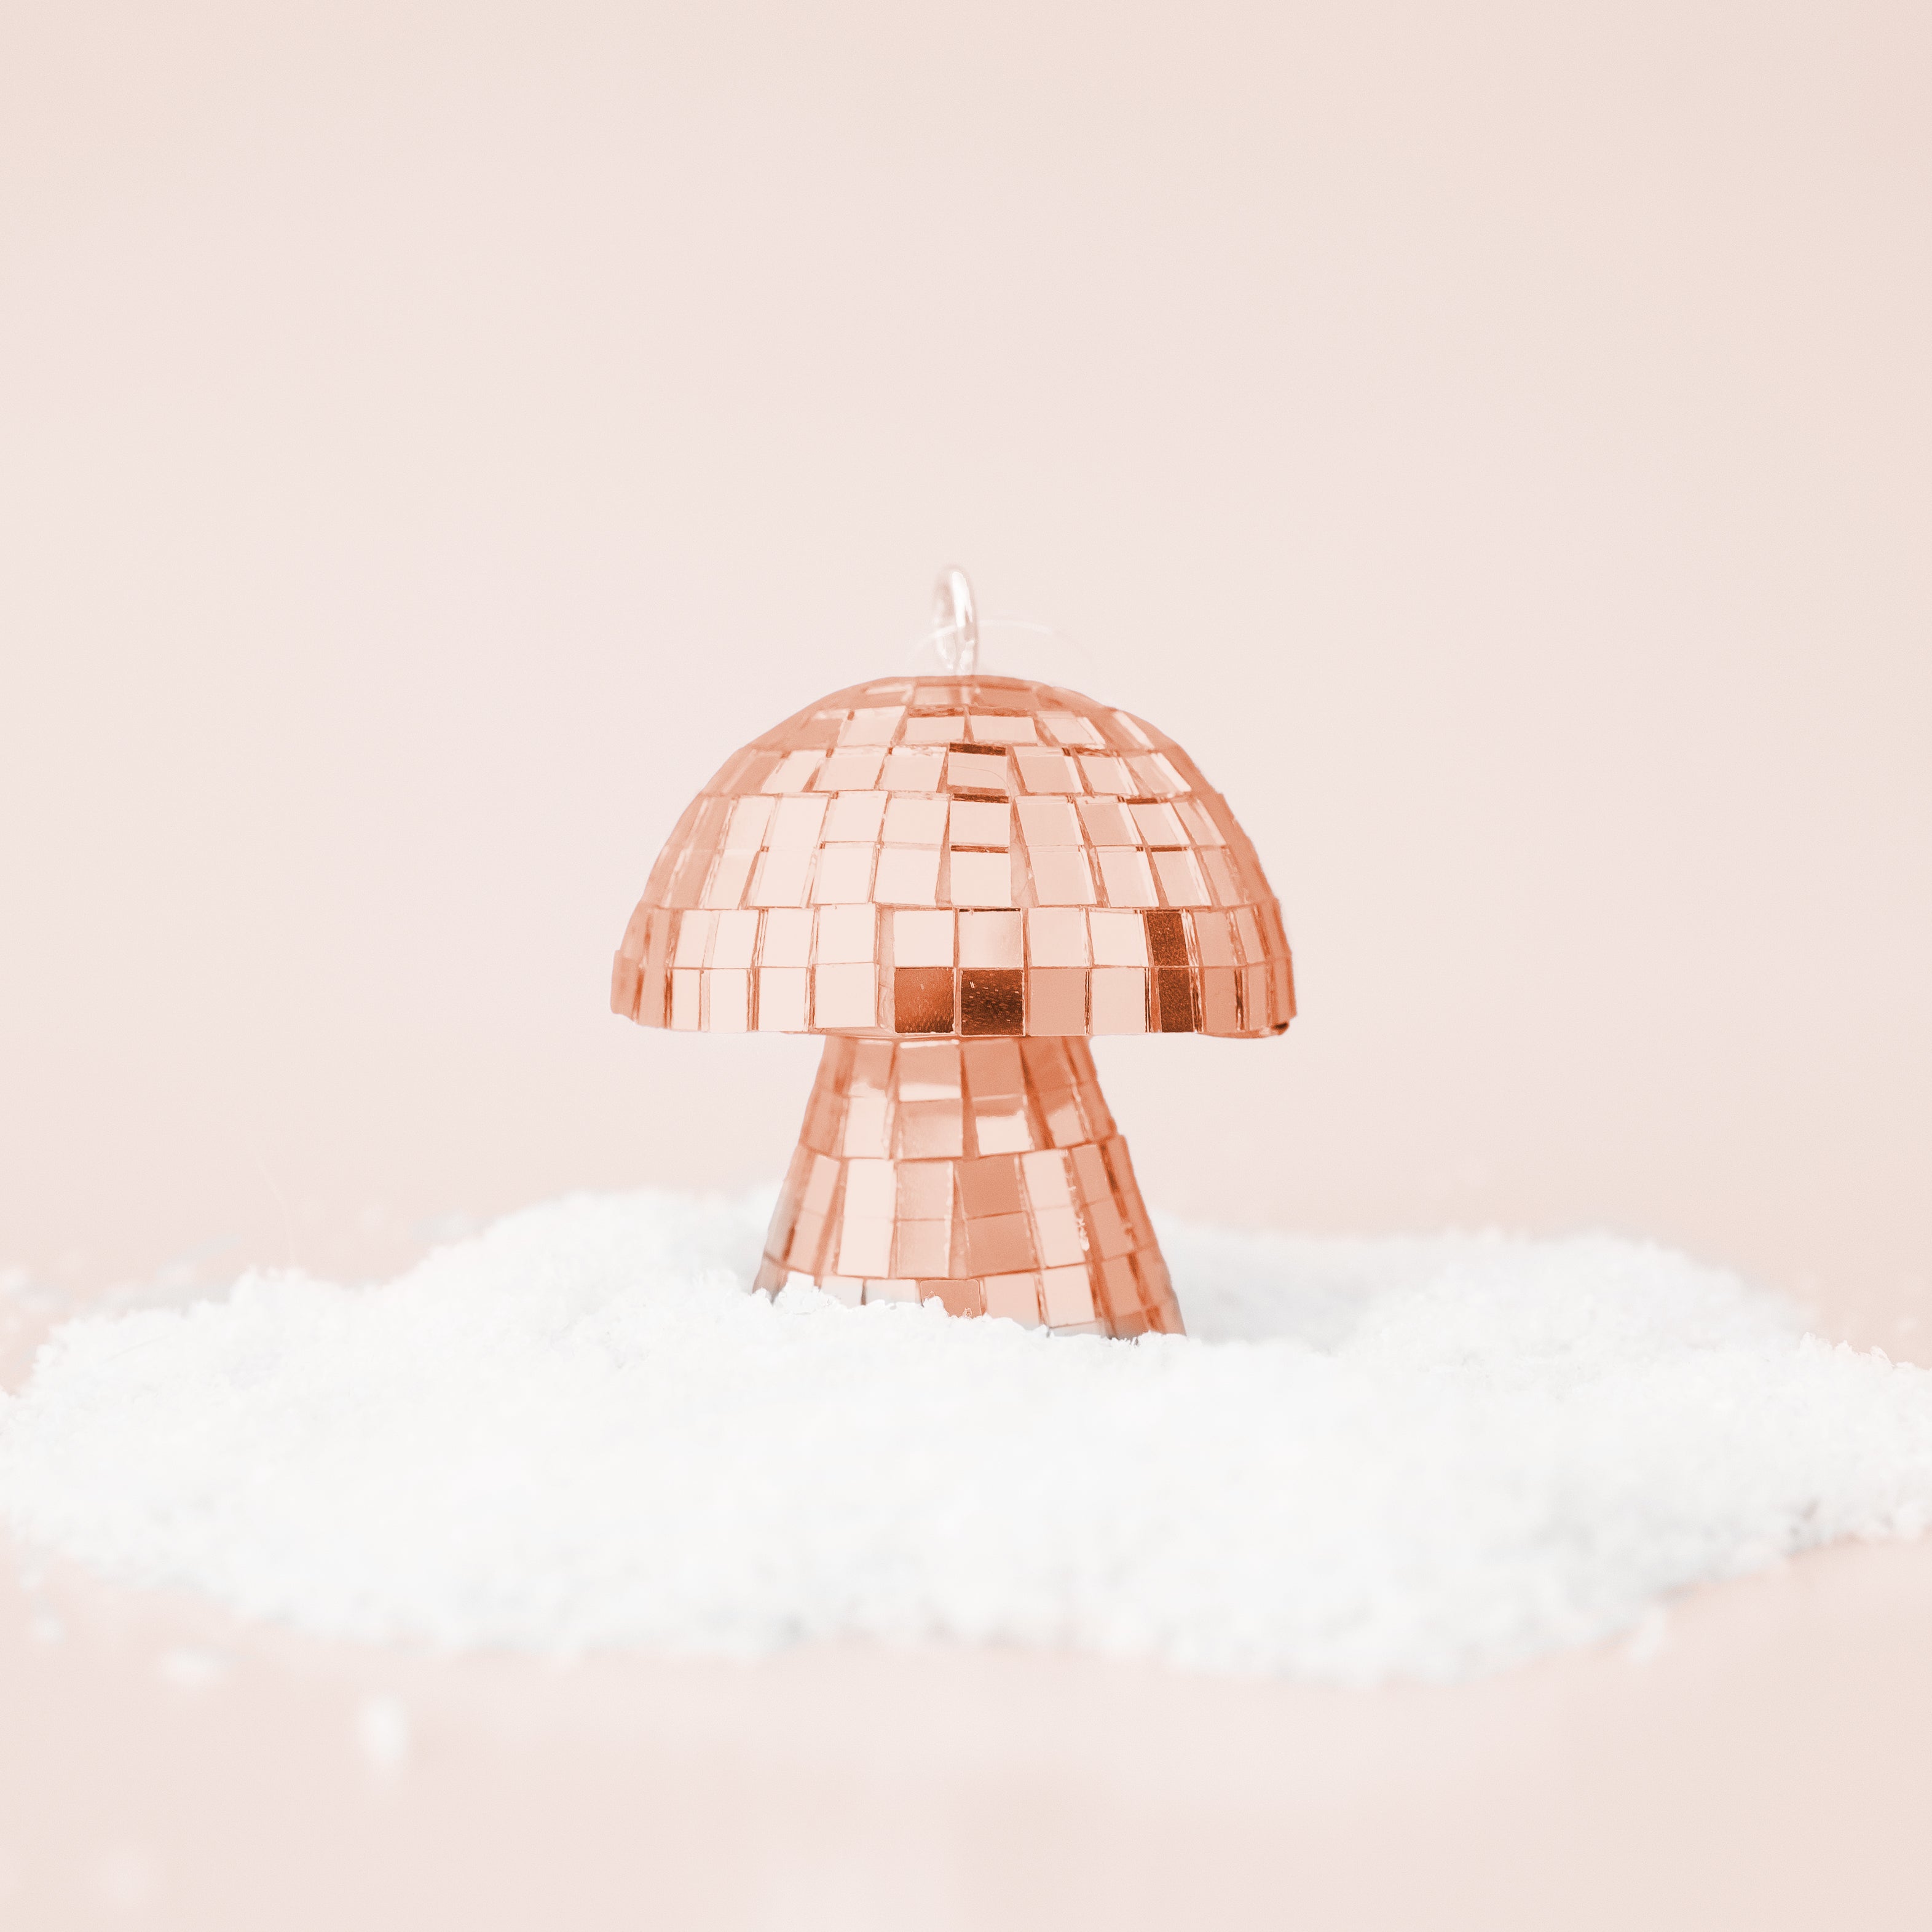 On a neutral snowy background is a rose gold disco mushroom shaped ornament